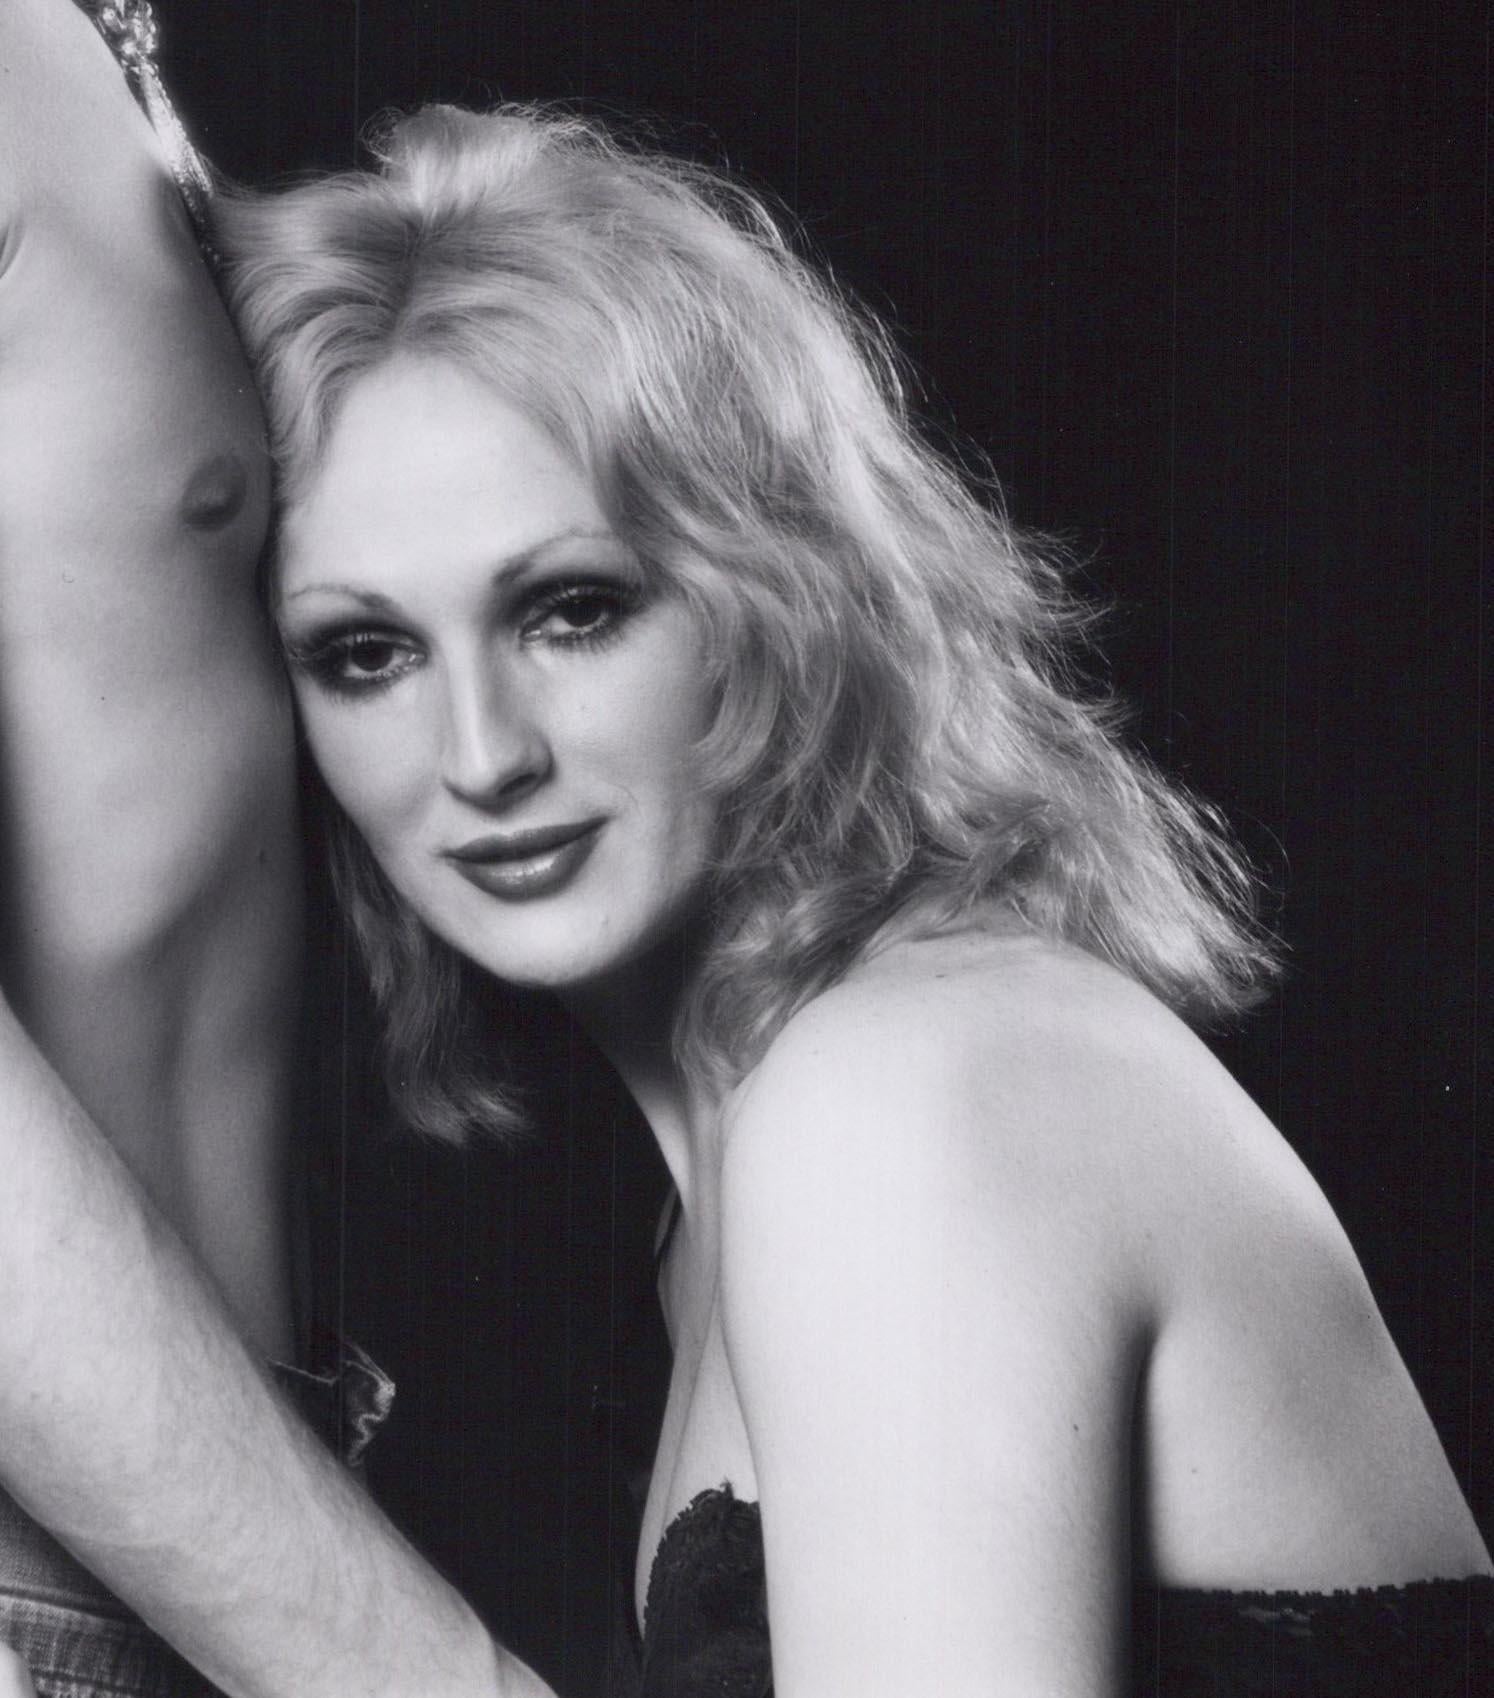 Andy Warhol Superstar Candy Darling and Dorian Gray - Photograph by Jack Mitchell